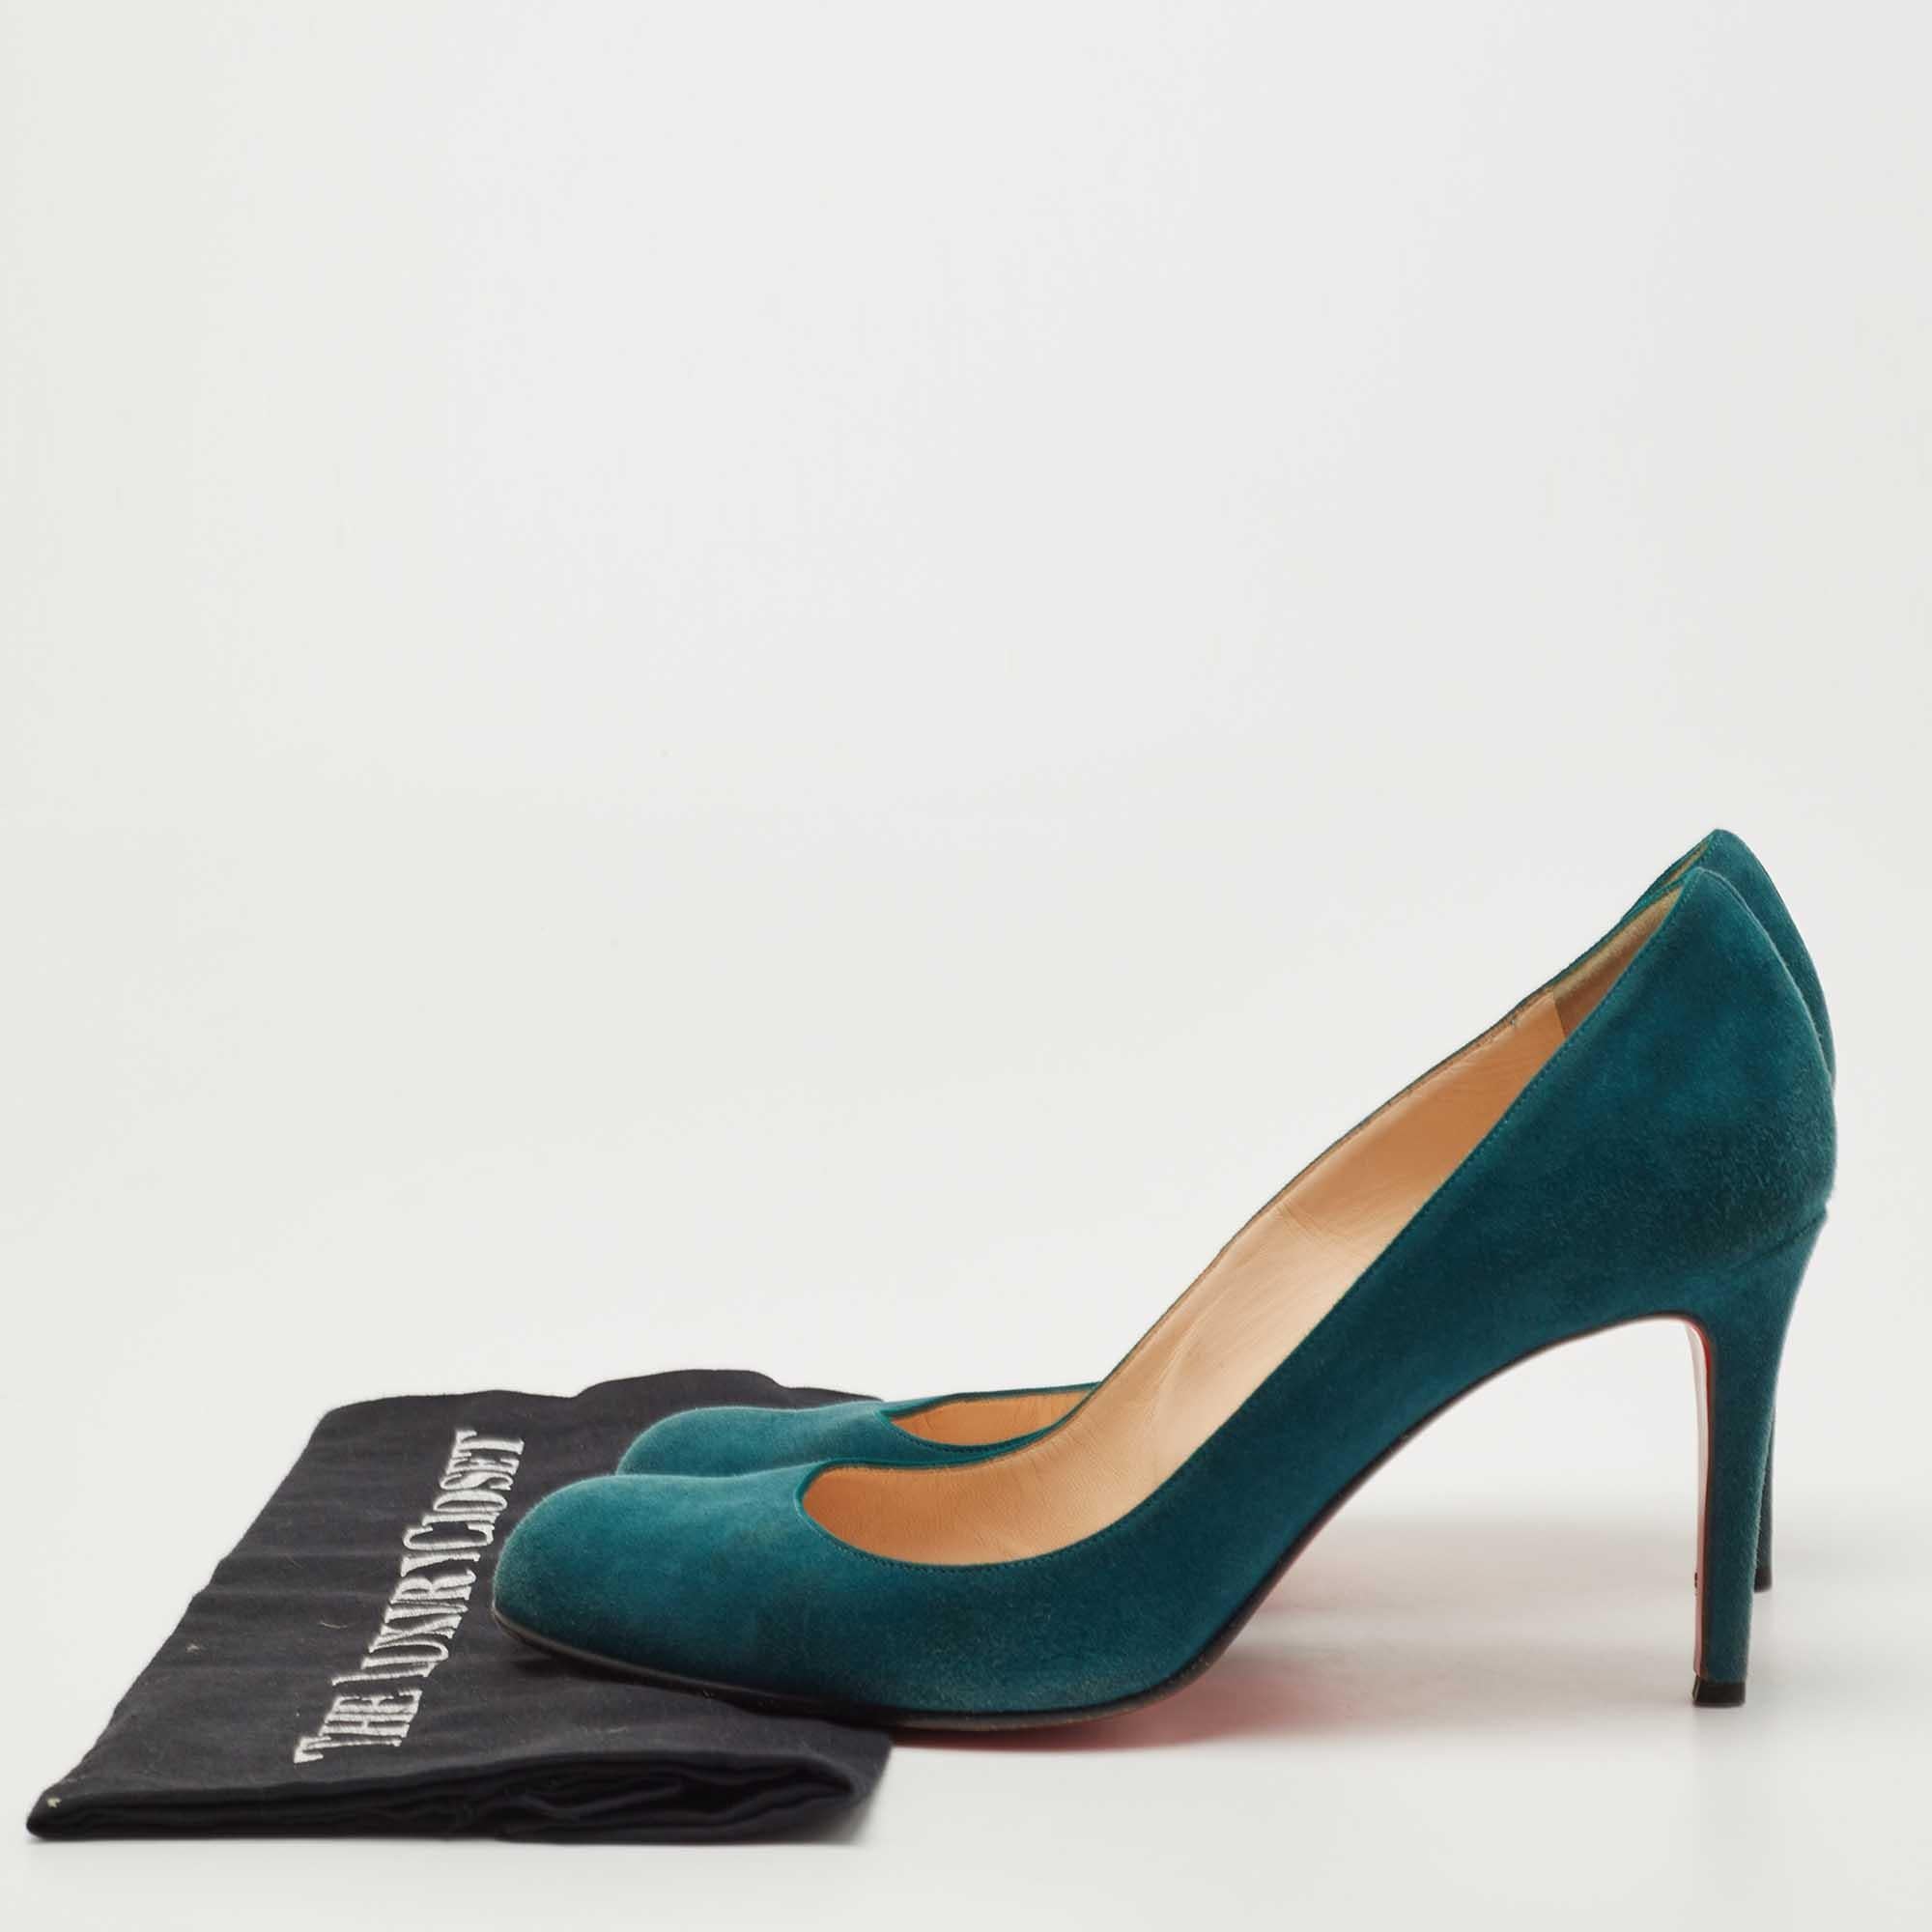 Christian Louboutin Teal Suede Simple Pumps Size 40.5 5